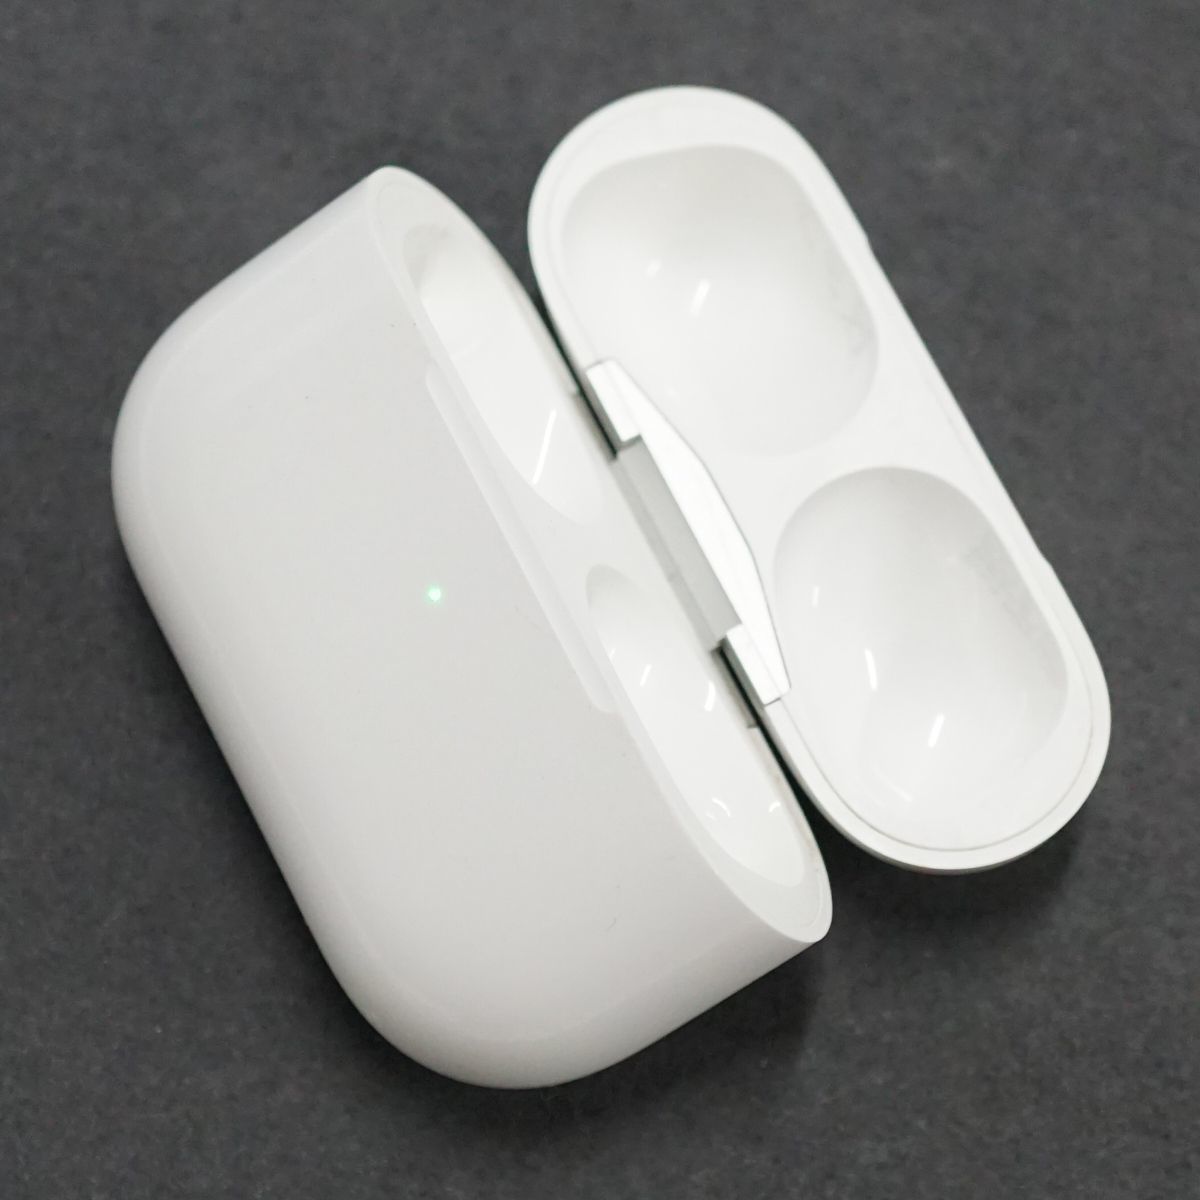 Apple AirPods Pro 充電ケースのみ USED美品 第一世代 イヤホン エアーポッズ プロ Qi MWP22J/A A2190 純正 送料無料 即日発送 V9156の画像4